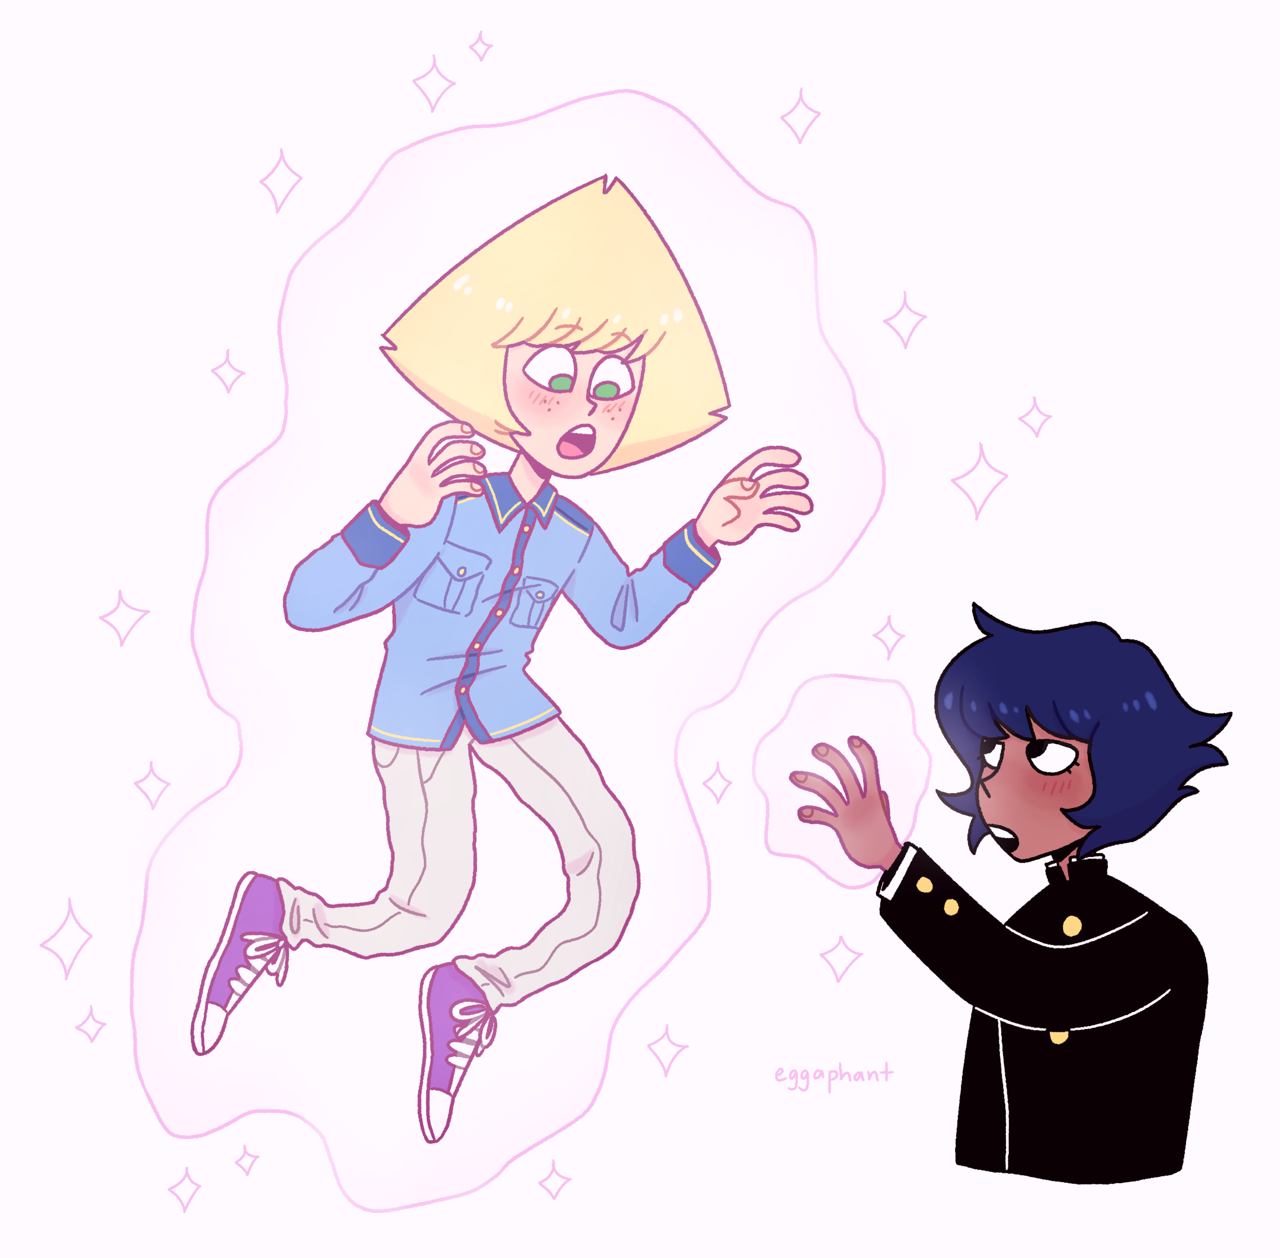 I live for Lapidot in Mob Psycho AU 👏
Idea originally by @thedenoftoons